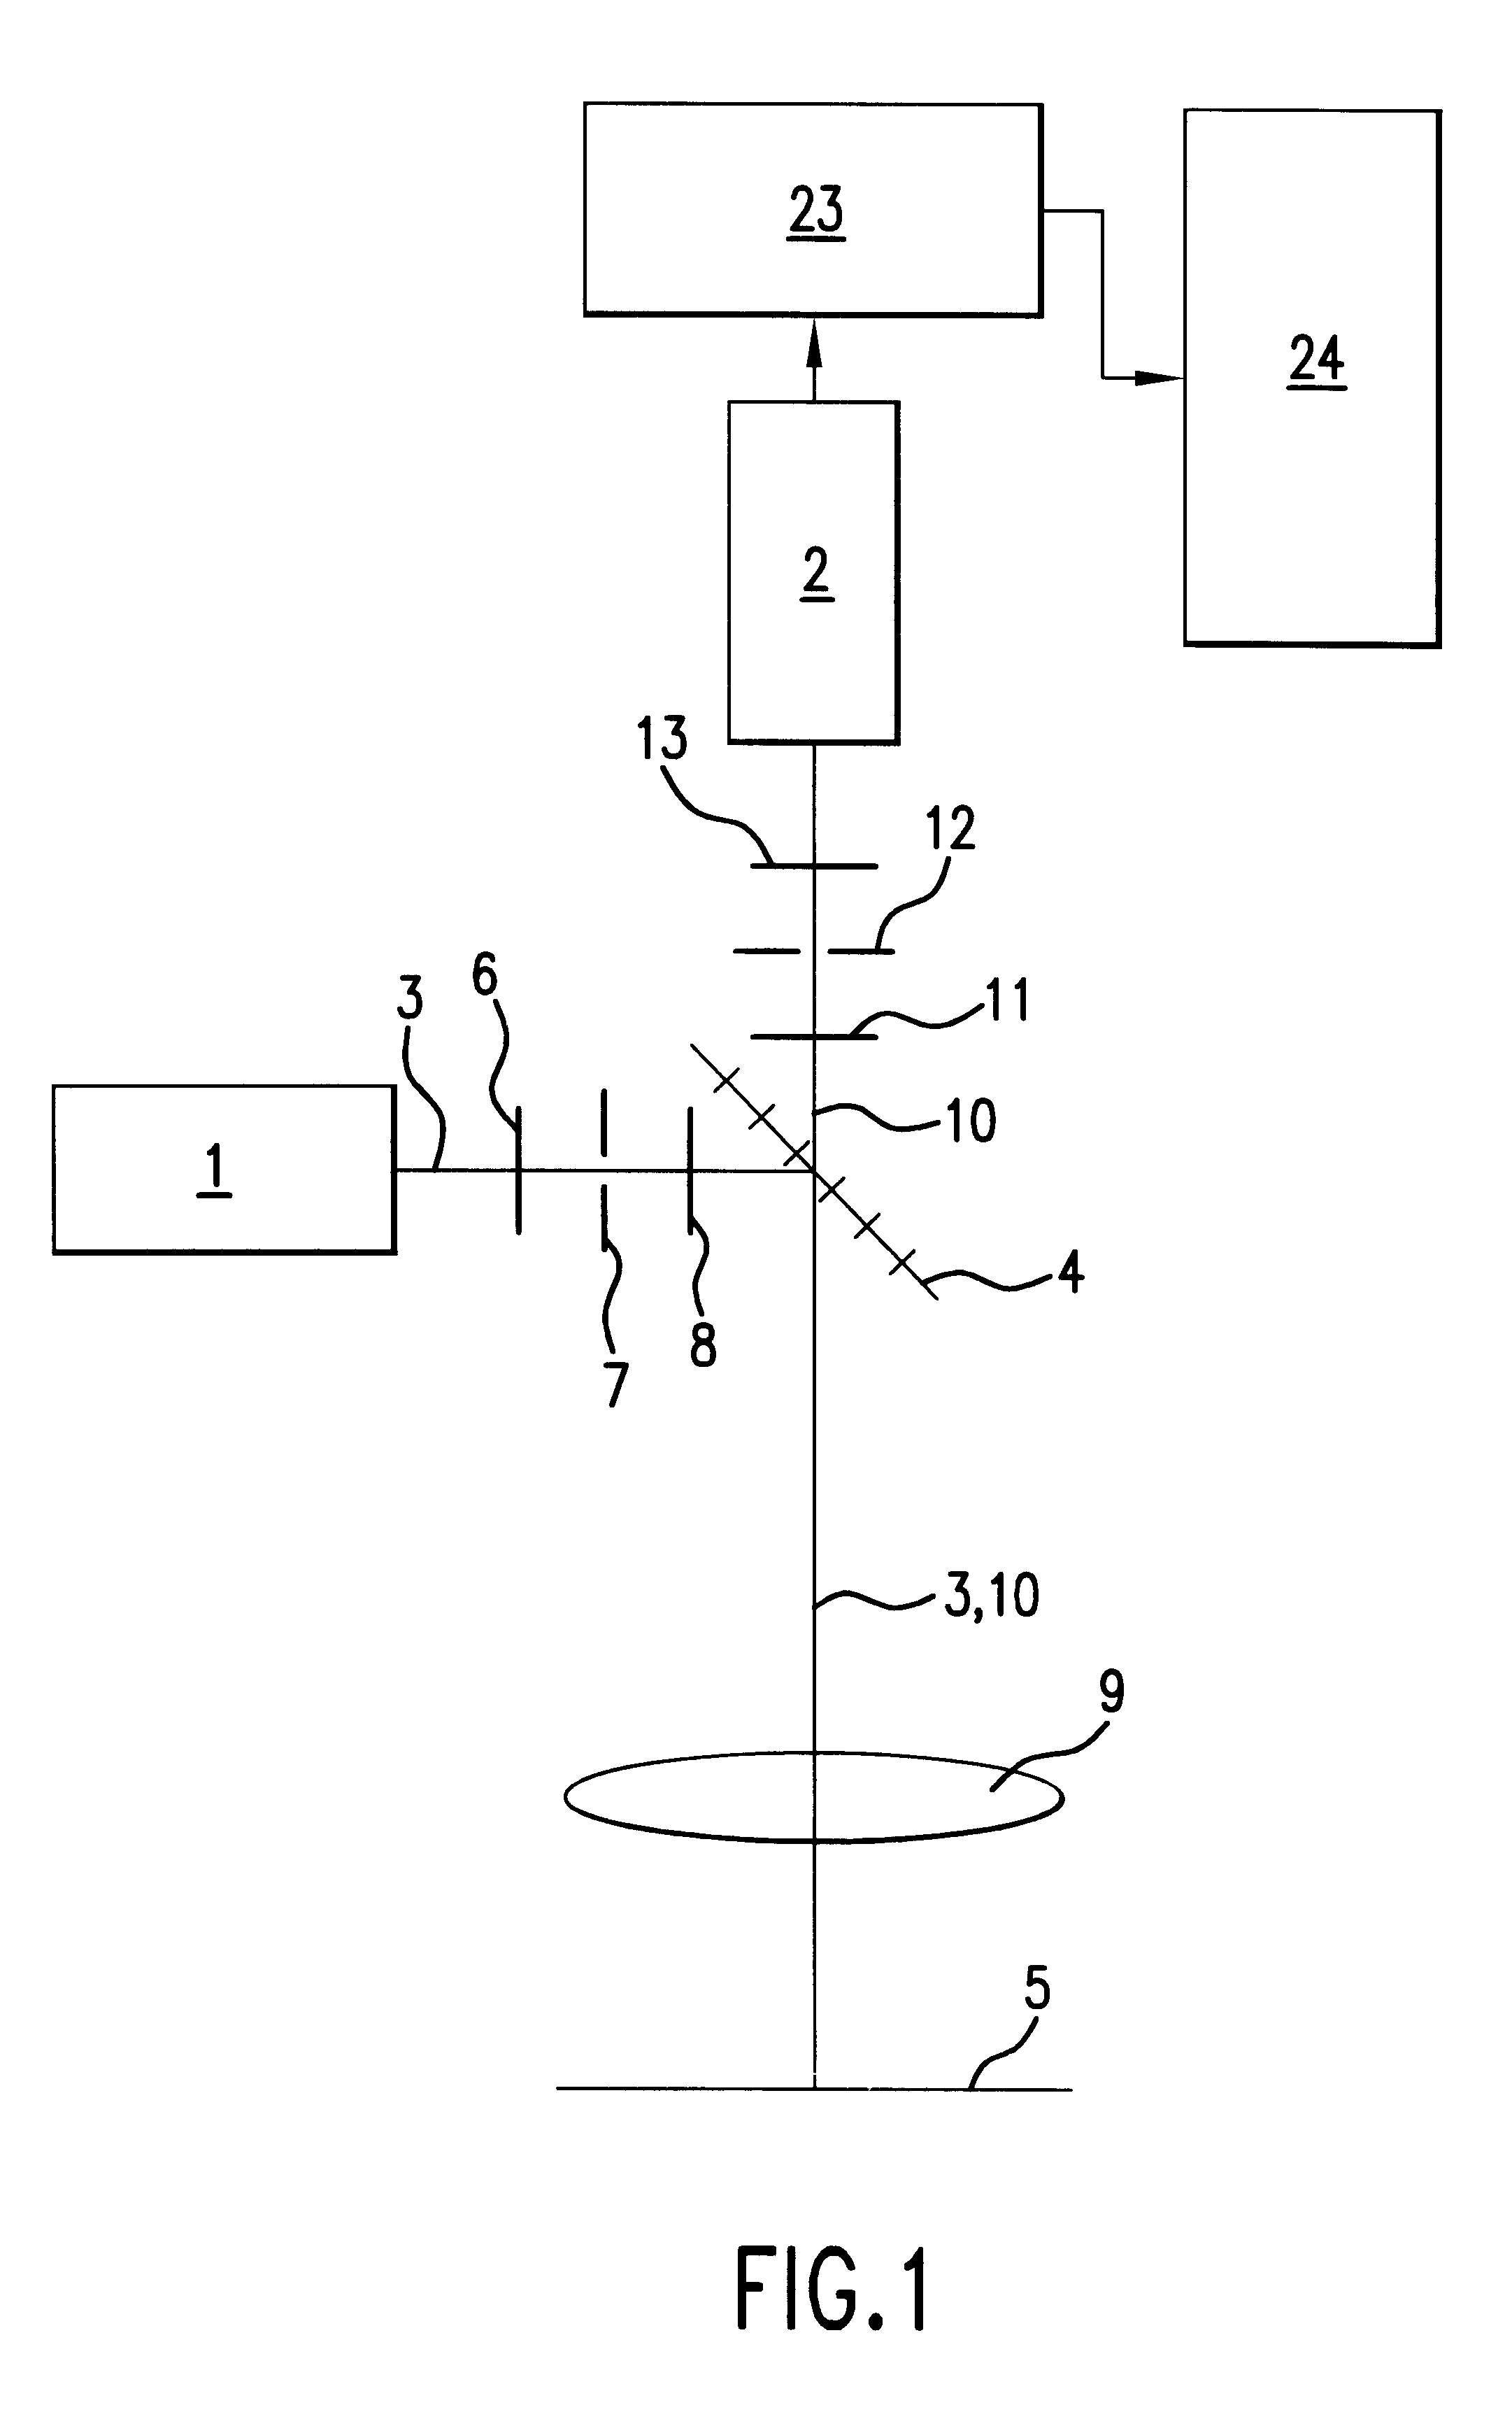 Method of finding, recording and evaluating object structures